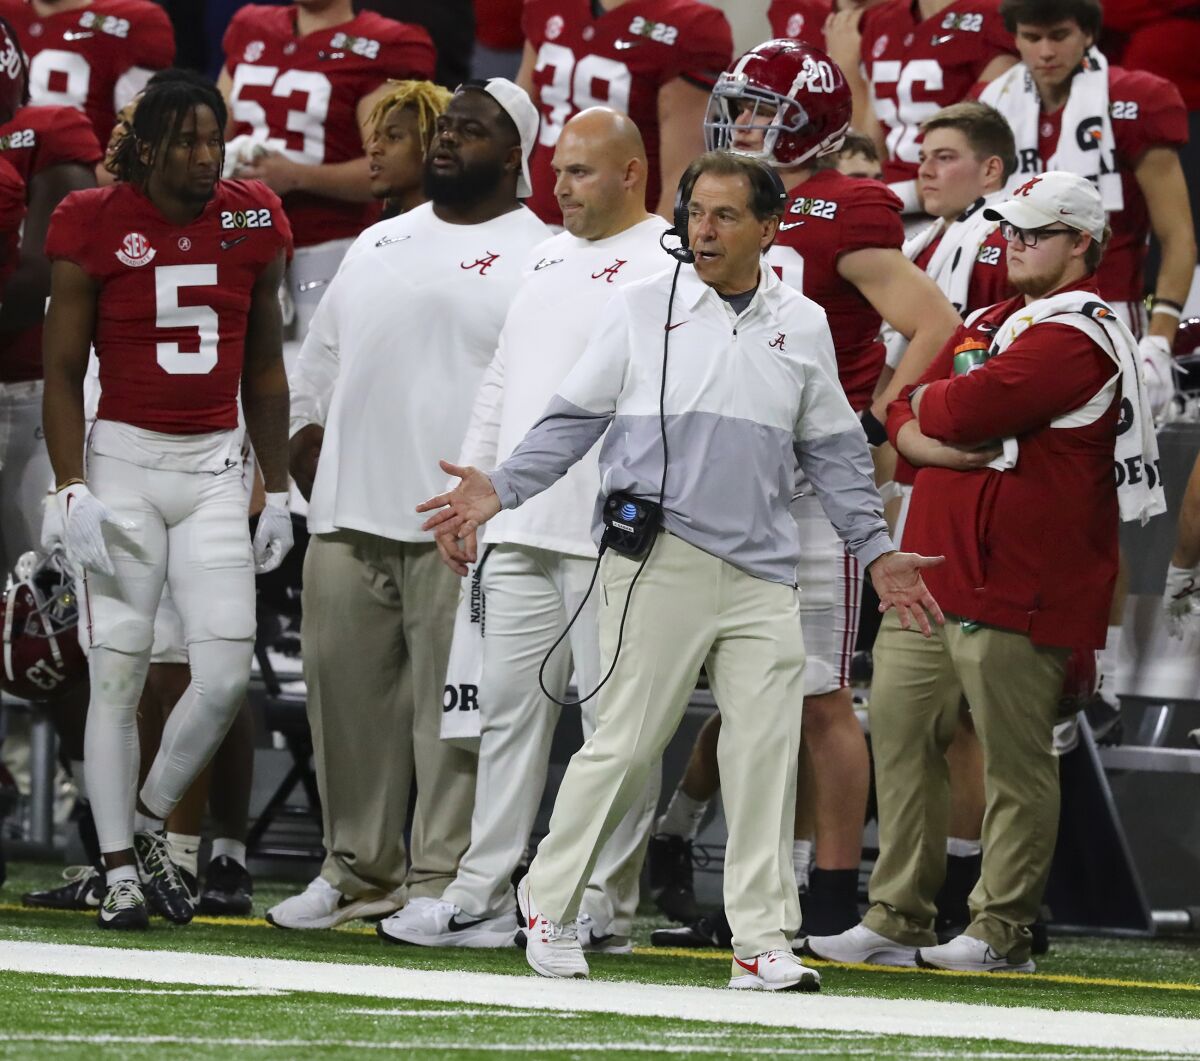 Alabama head coach Nick Saban reacts on the sidelines during the 4th quarter as Georgia drives for a touchdown to take control of the game in the College Football Playoff Championship game on Monday, Jan. 10, 2022, in Indianapolis. (Curtis Compton/Atlanta Journal-Constitution via AP)